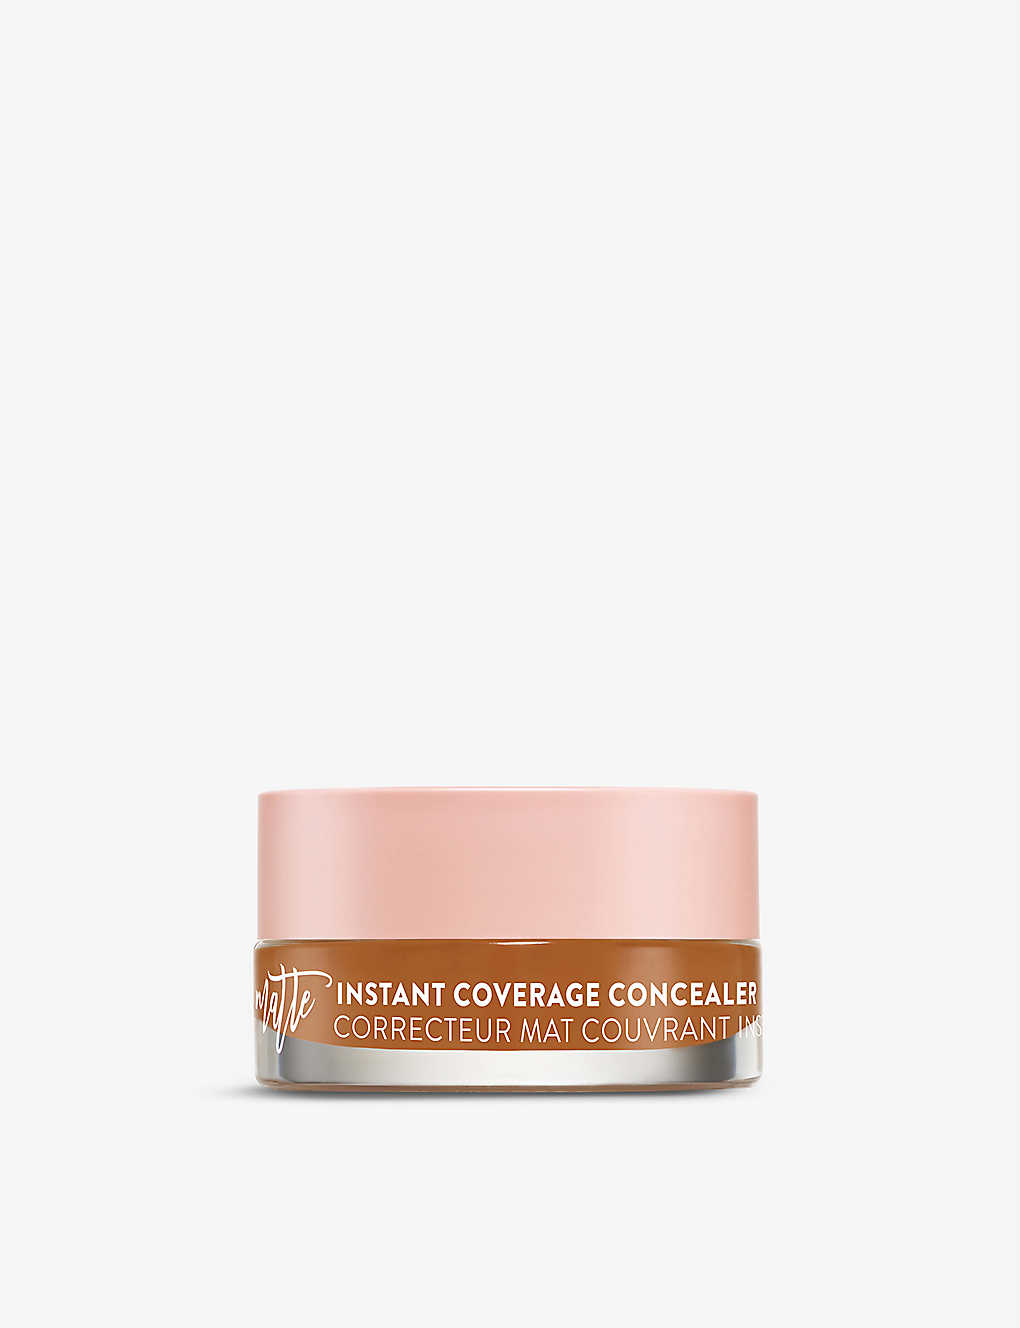 Too Faced Peach Perfect Instant Coverage Concealer 7g In Nutmeg